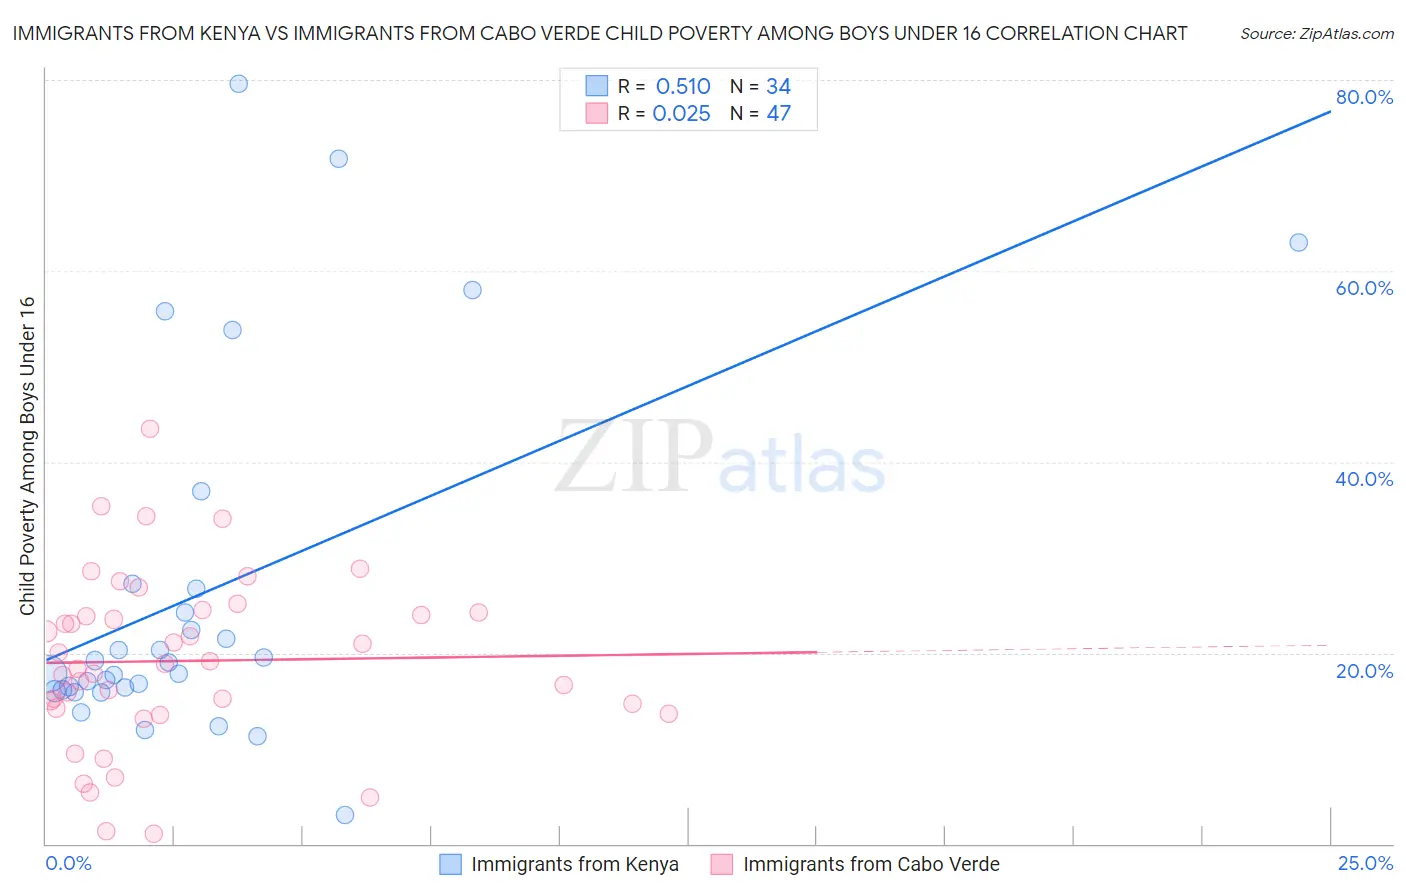 Immigrants from Kenya vs Immigrants from Cabo Verde Child Poverty Among Boys Under 16